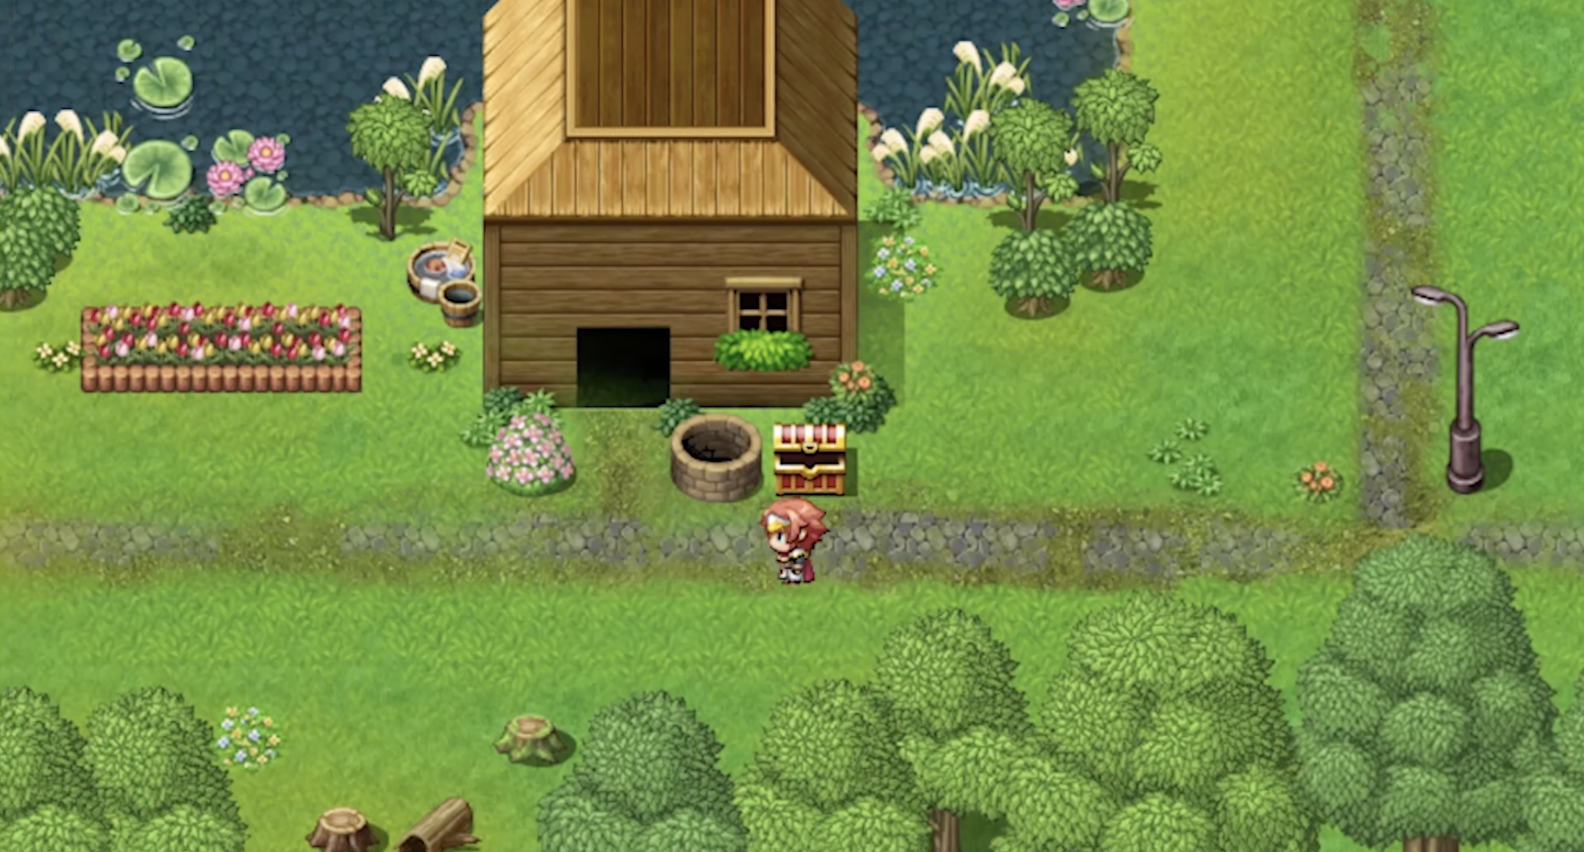 Screenshot of a video game with a character walking on a garden in front of a house